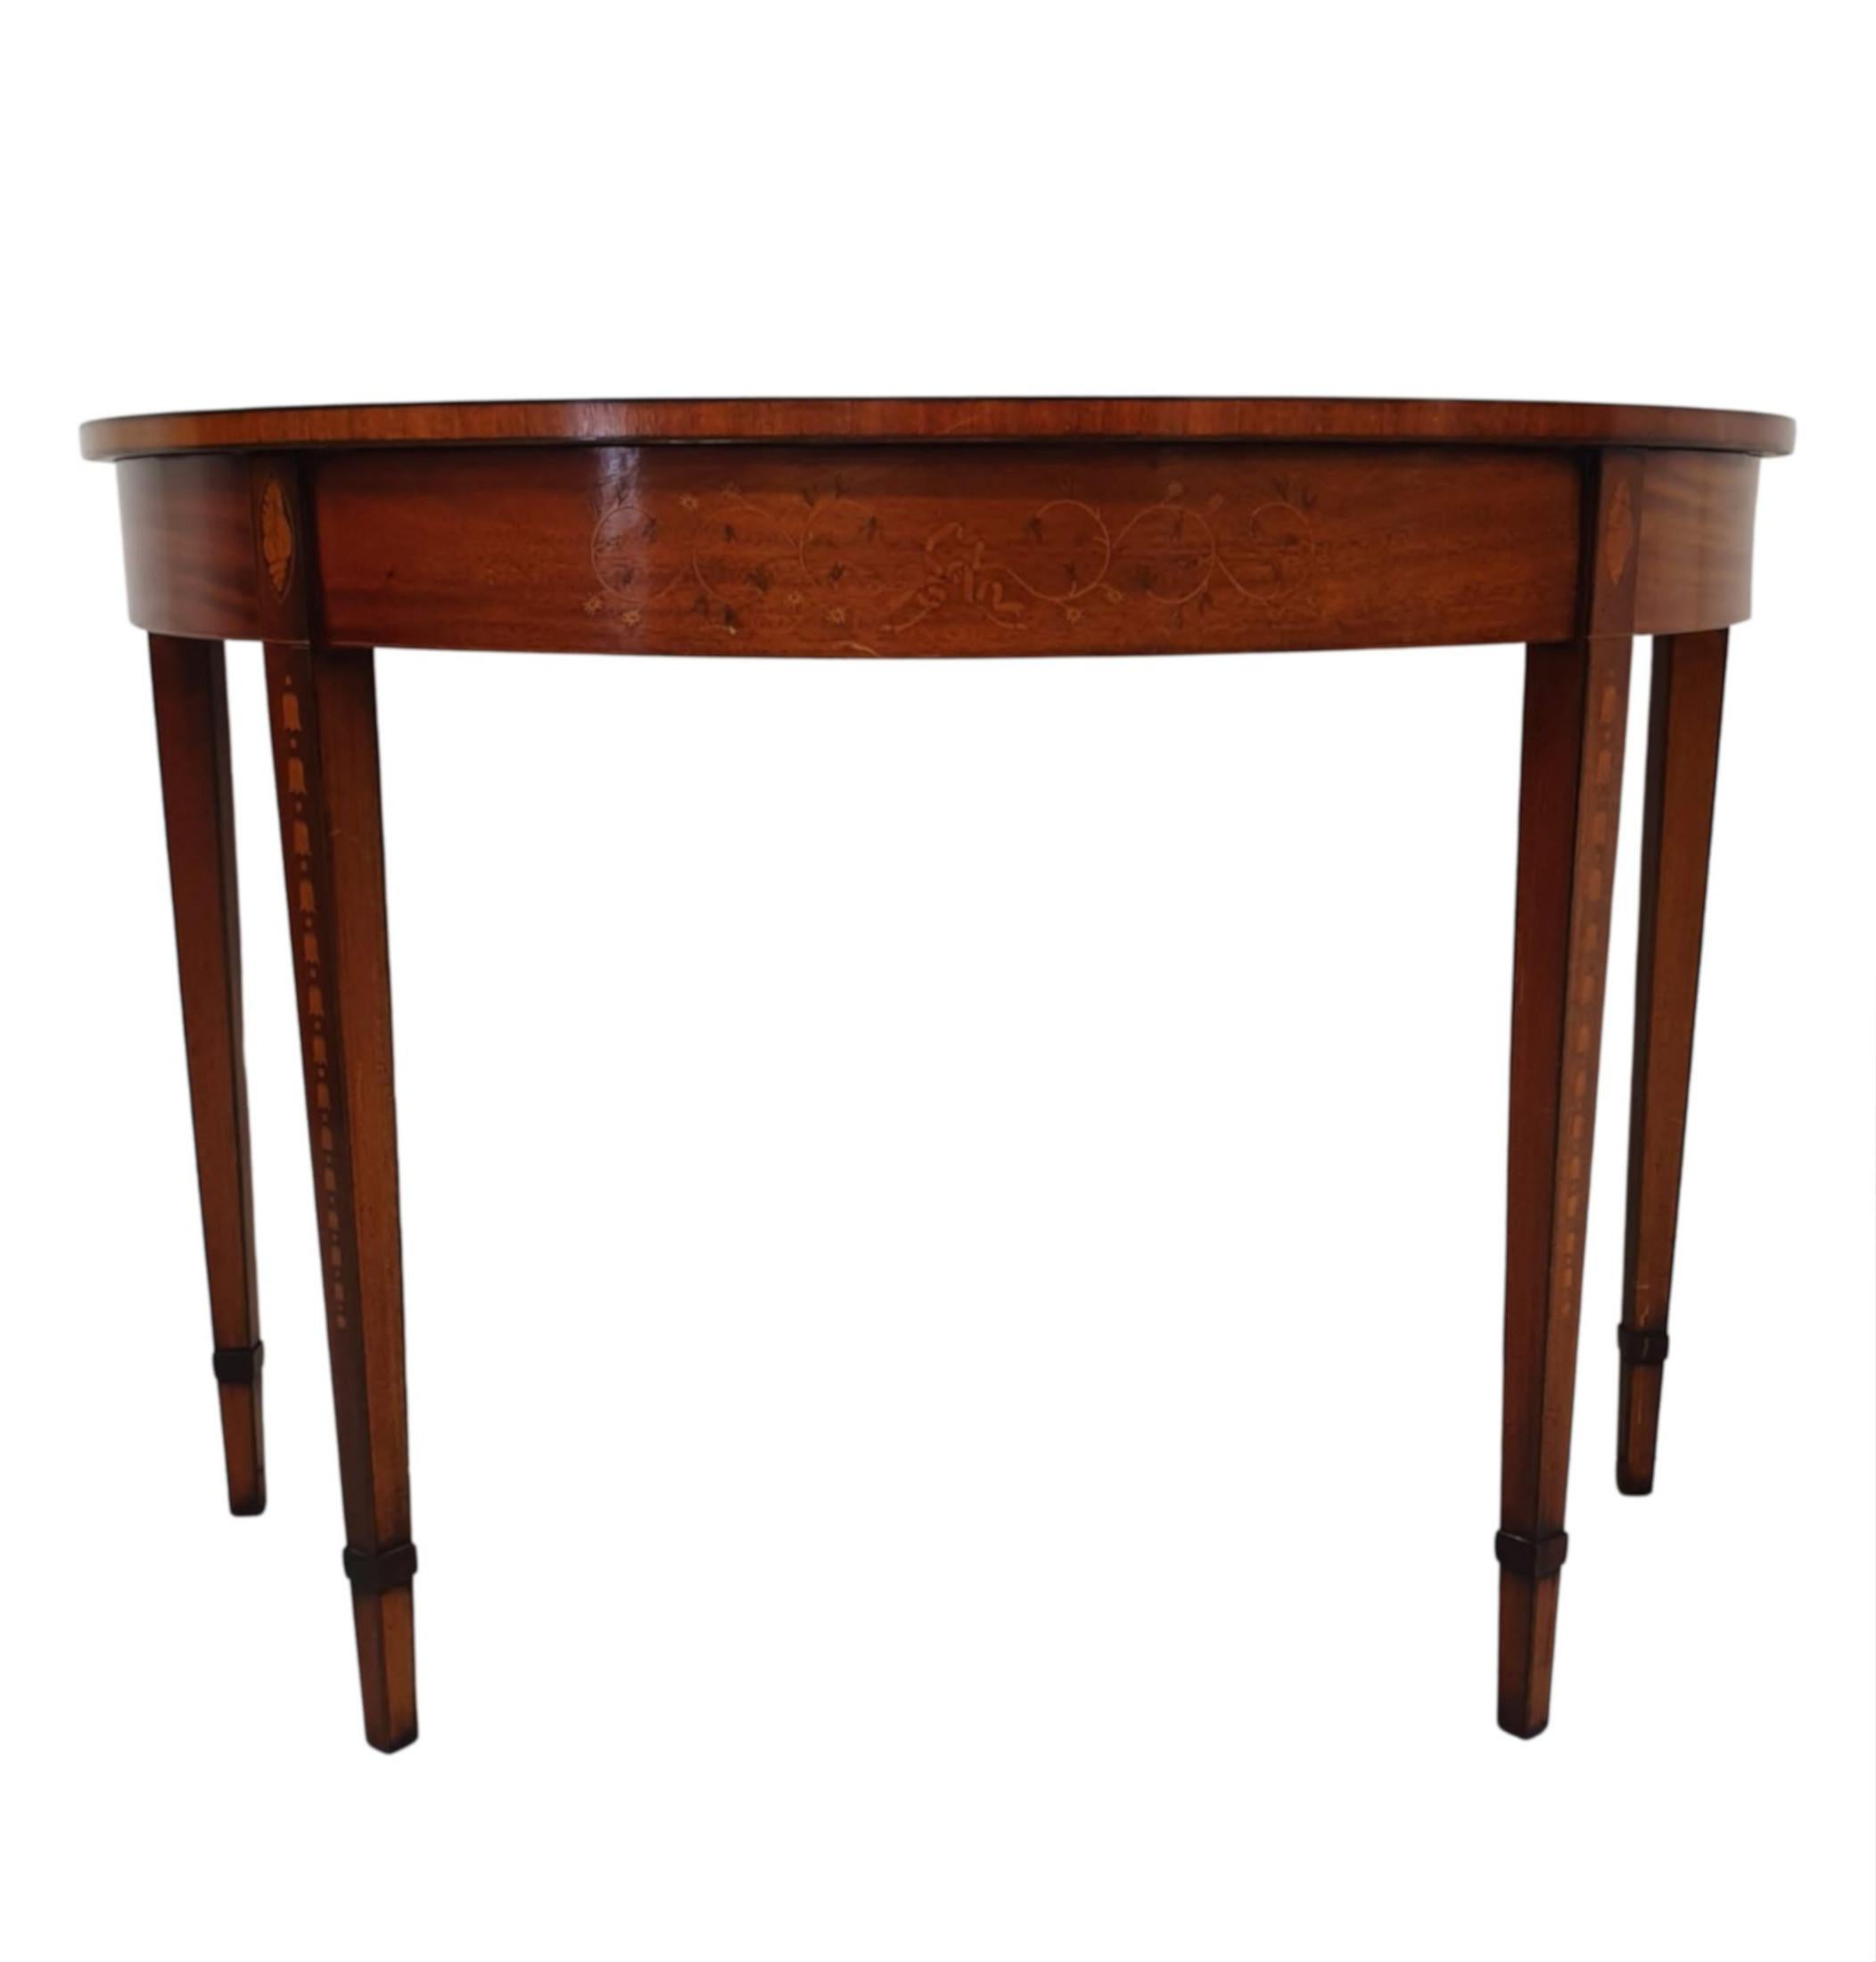 English Fabulous Mid-20th Century Inlaid Demi Lune Table For Sale